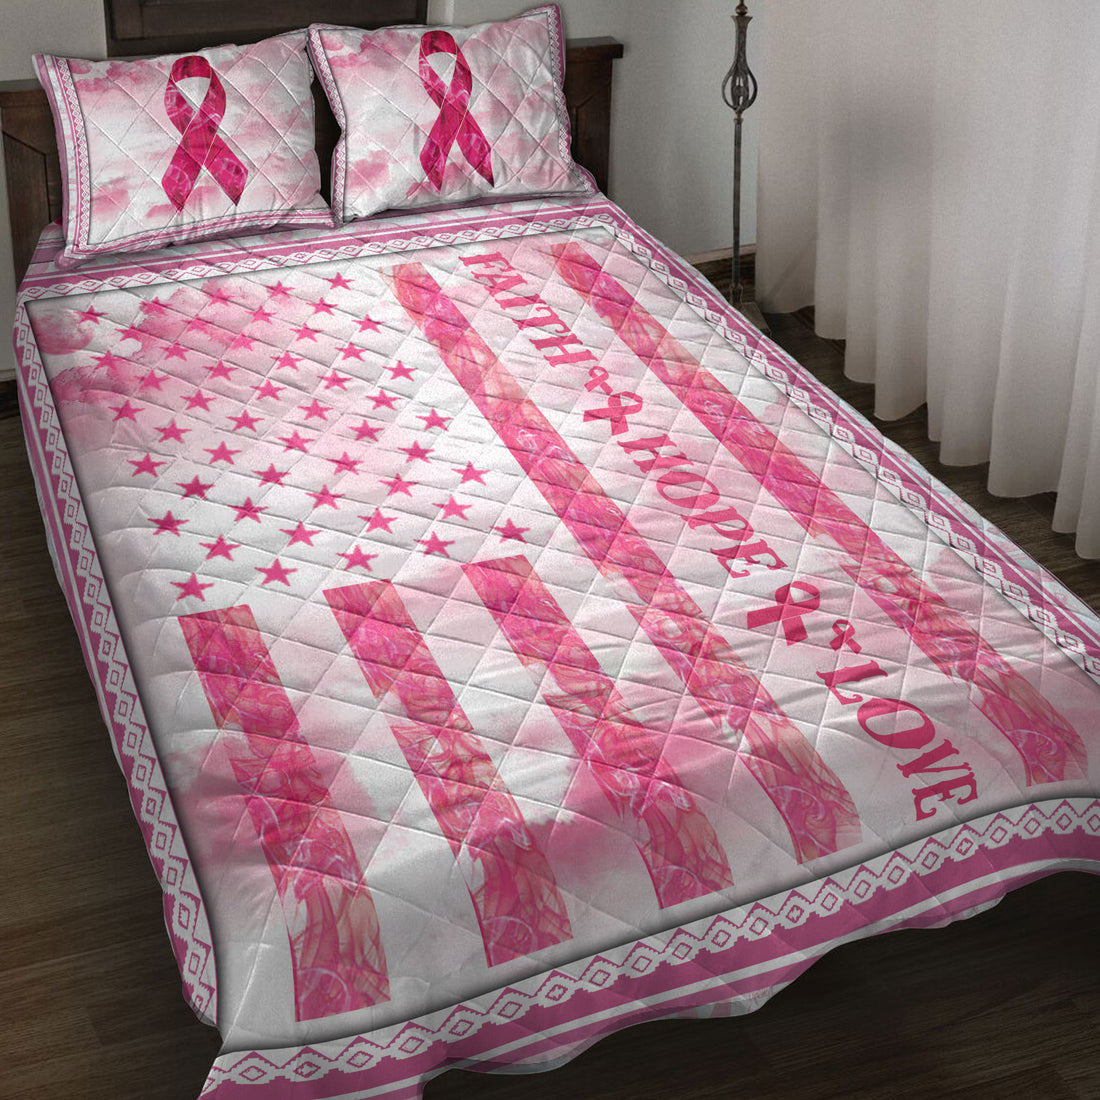 Ohaprints-Quilt-Bed-Set-Pillowcase-Breast-Cancer-Awareness-Pink-Bc-Support-Faith-Hope-Love-Blanket-Bedspread-Bedding-3868-Throw (55'' x 60'')